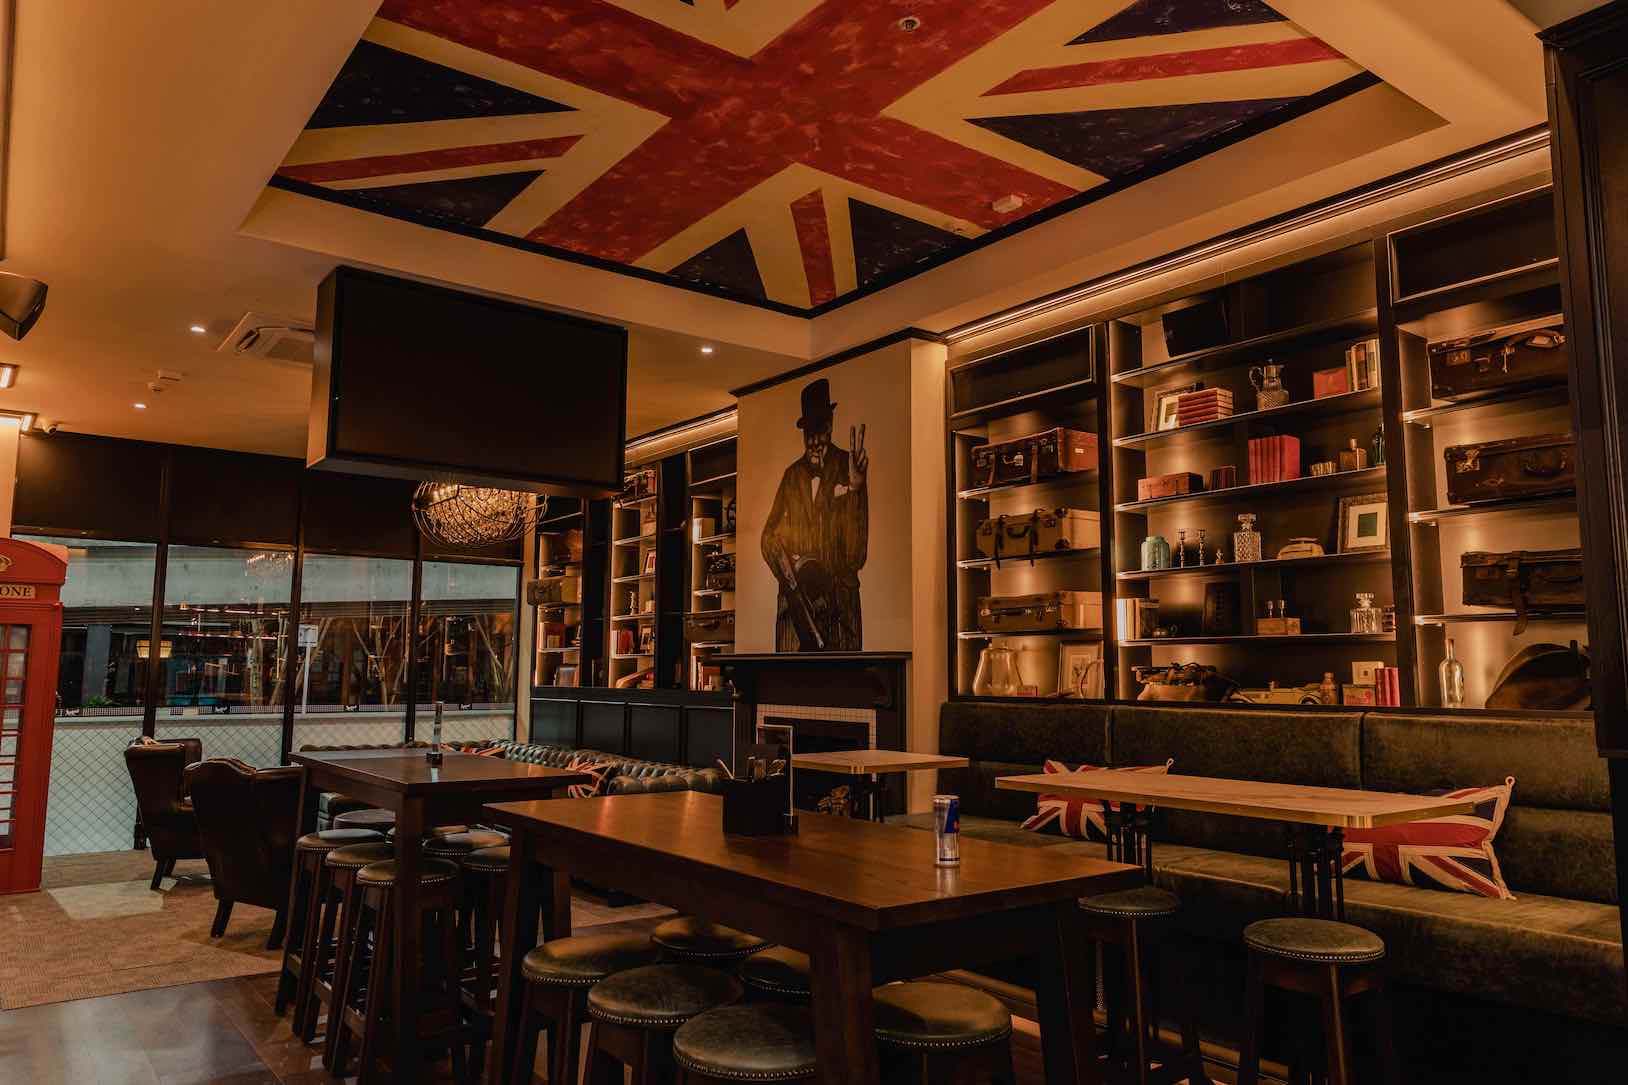 London Themed Interior Architecture for The Fox